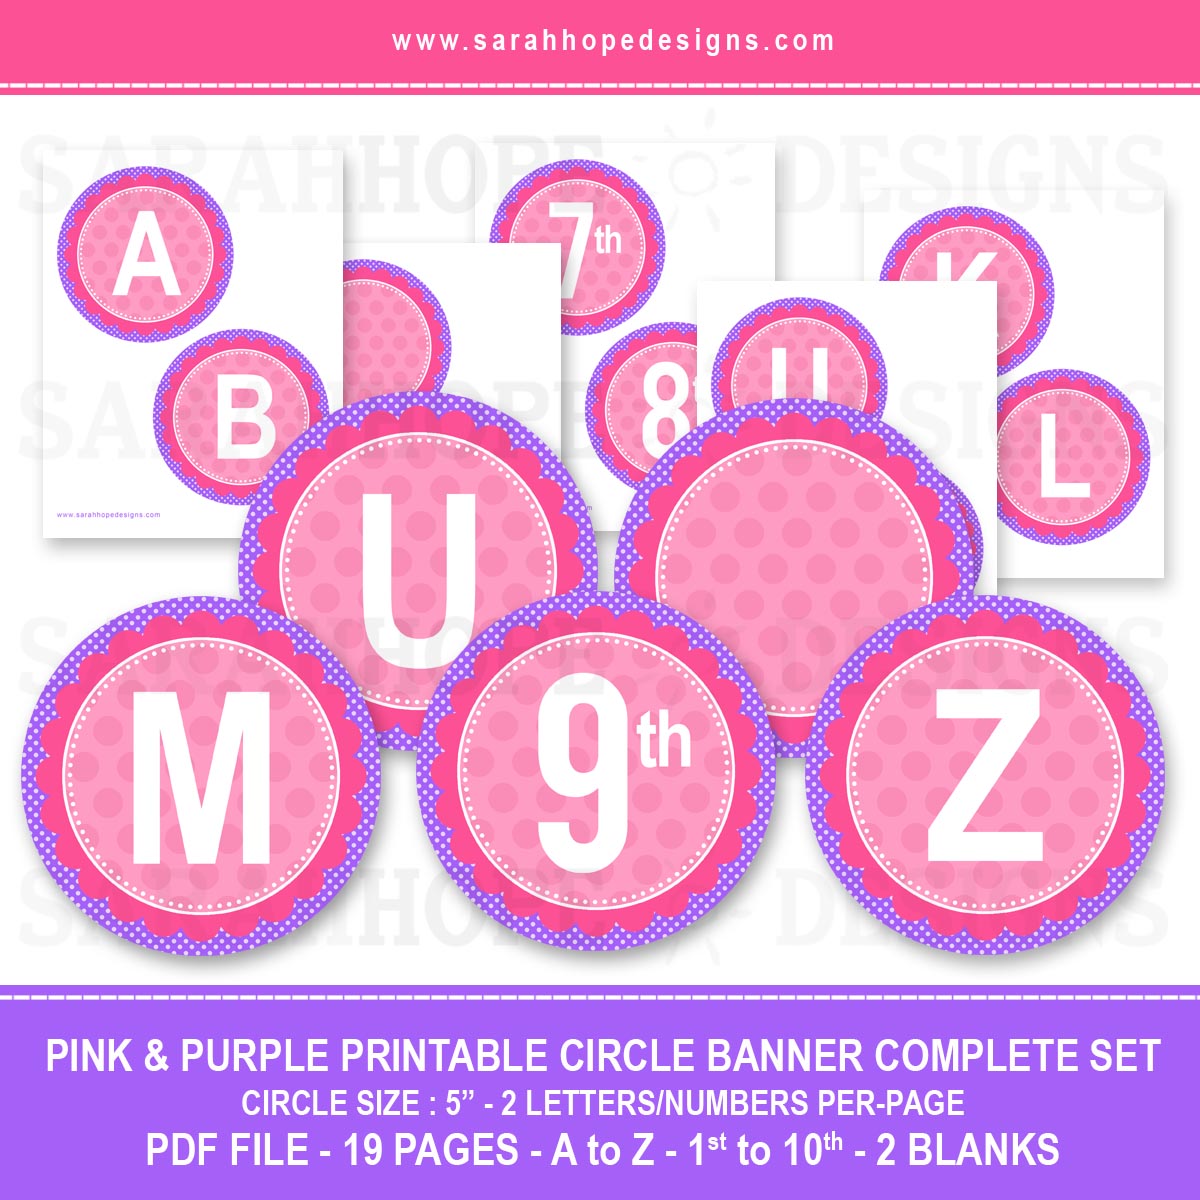 Spell Out Anything With These FREE Alphabet Circle Banners From Sarah 